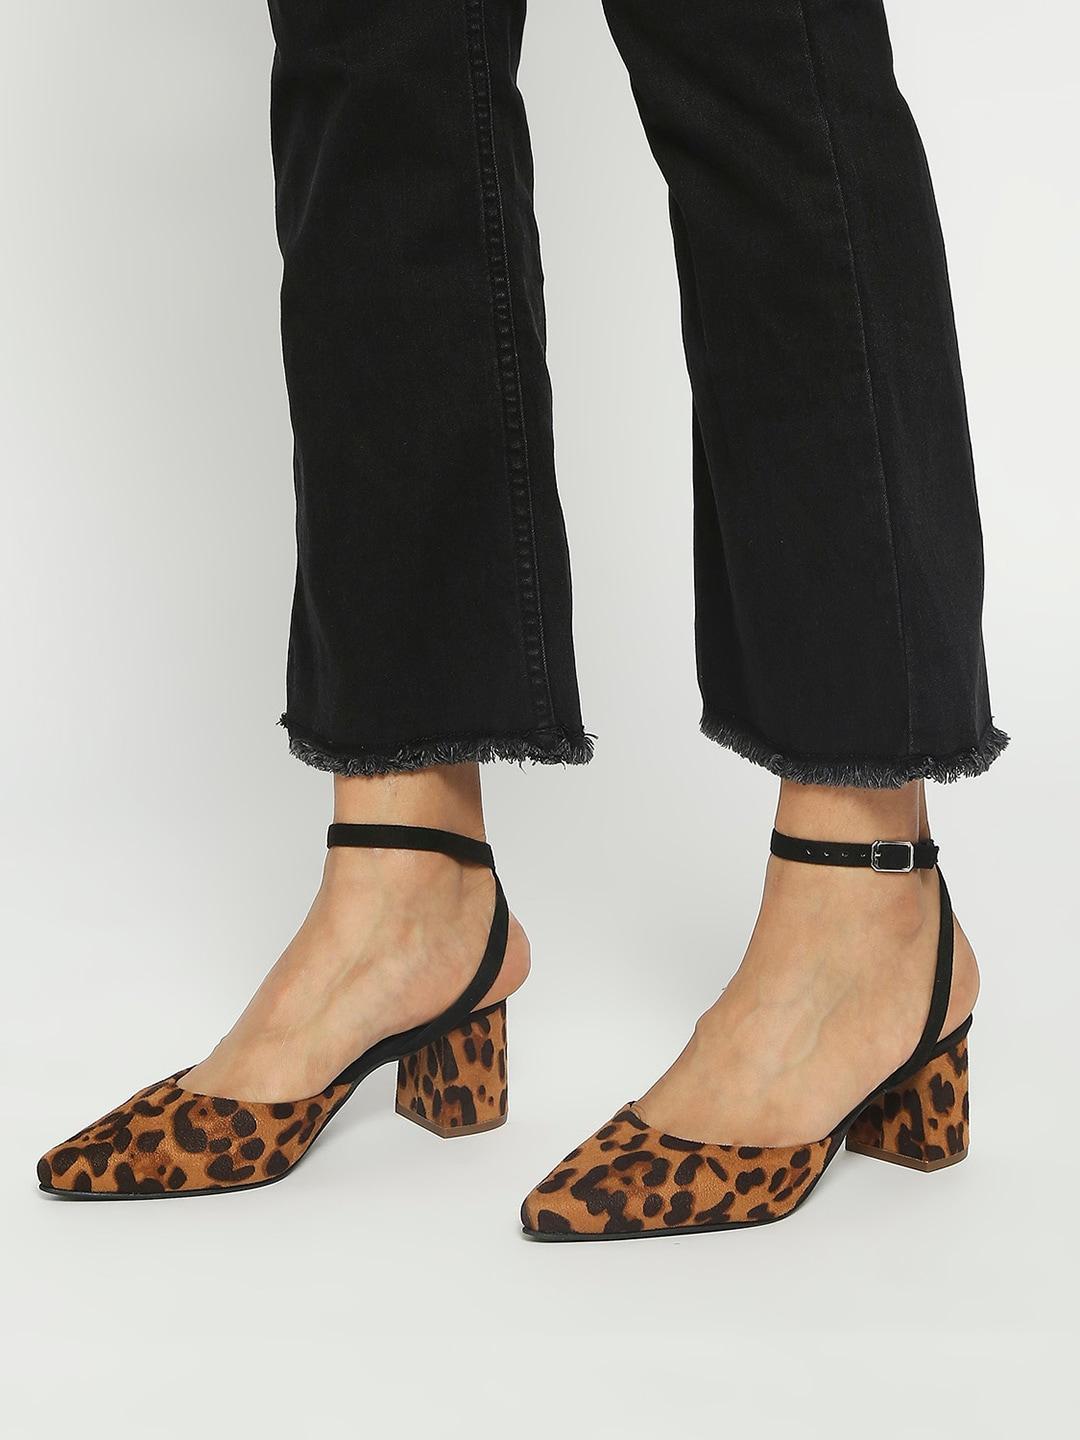 T.ELEVEN Pointed Toe Printed Suede Block Heeled Pumps